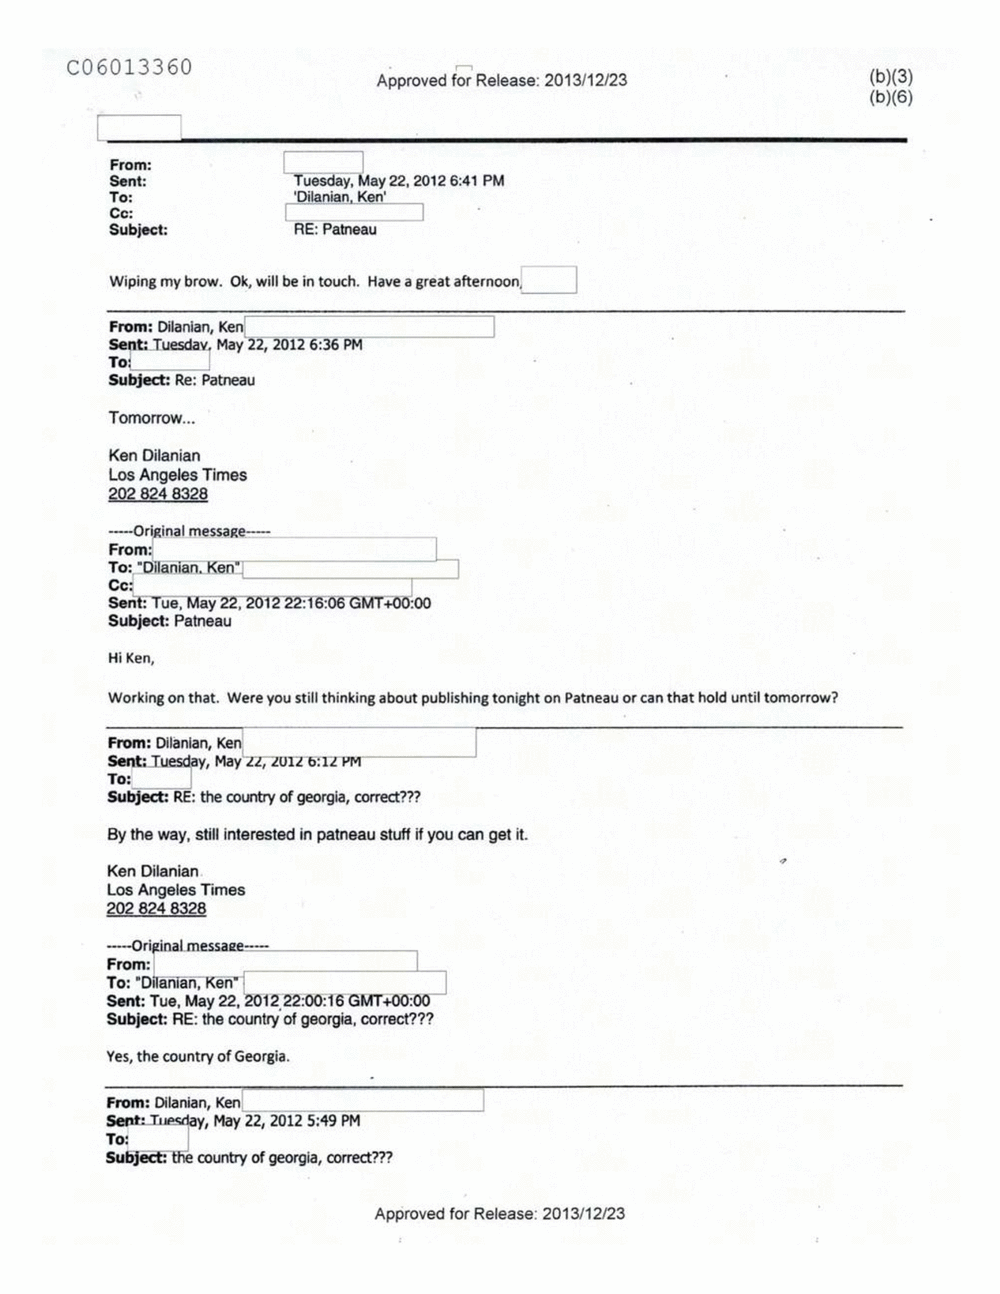 Page 283 from Email Correspondence Between Reporters and CIA Flacks